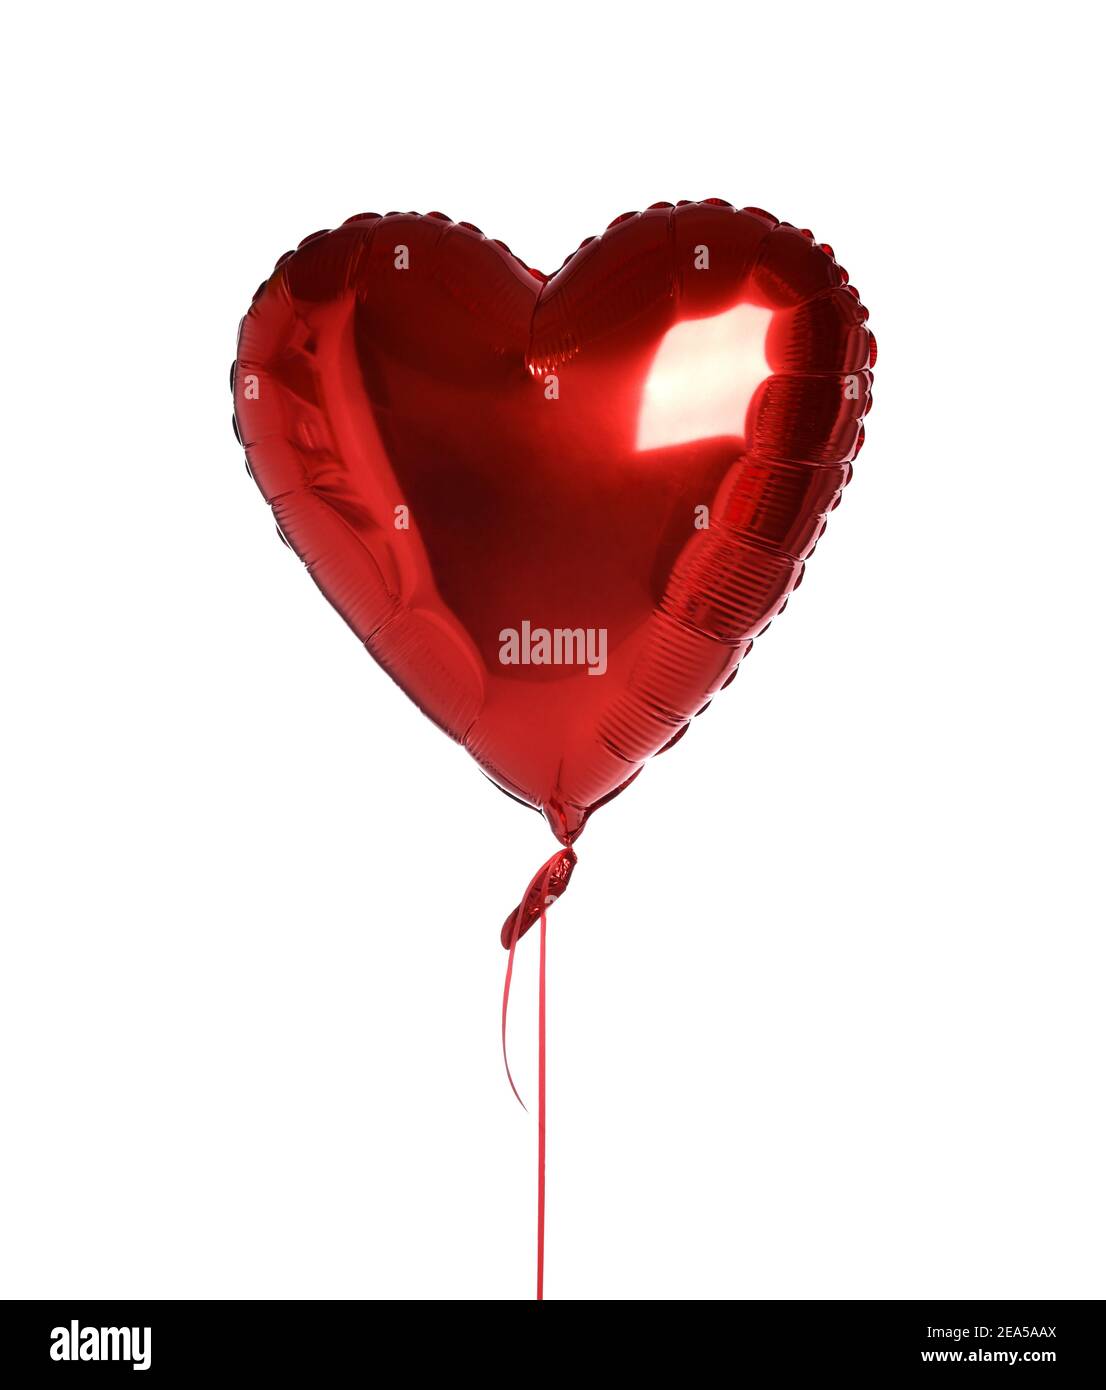 20 x NEW RED LOVE HEART SHAPE FOIL BALLOONS WEDDING ENGAGEMENT PARTY DECORATIONS 